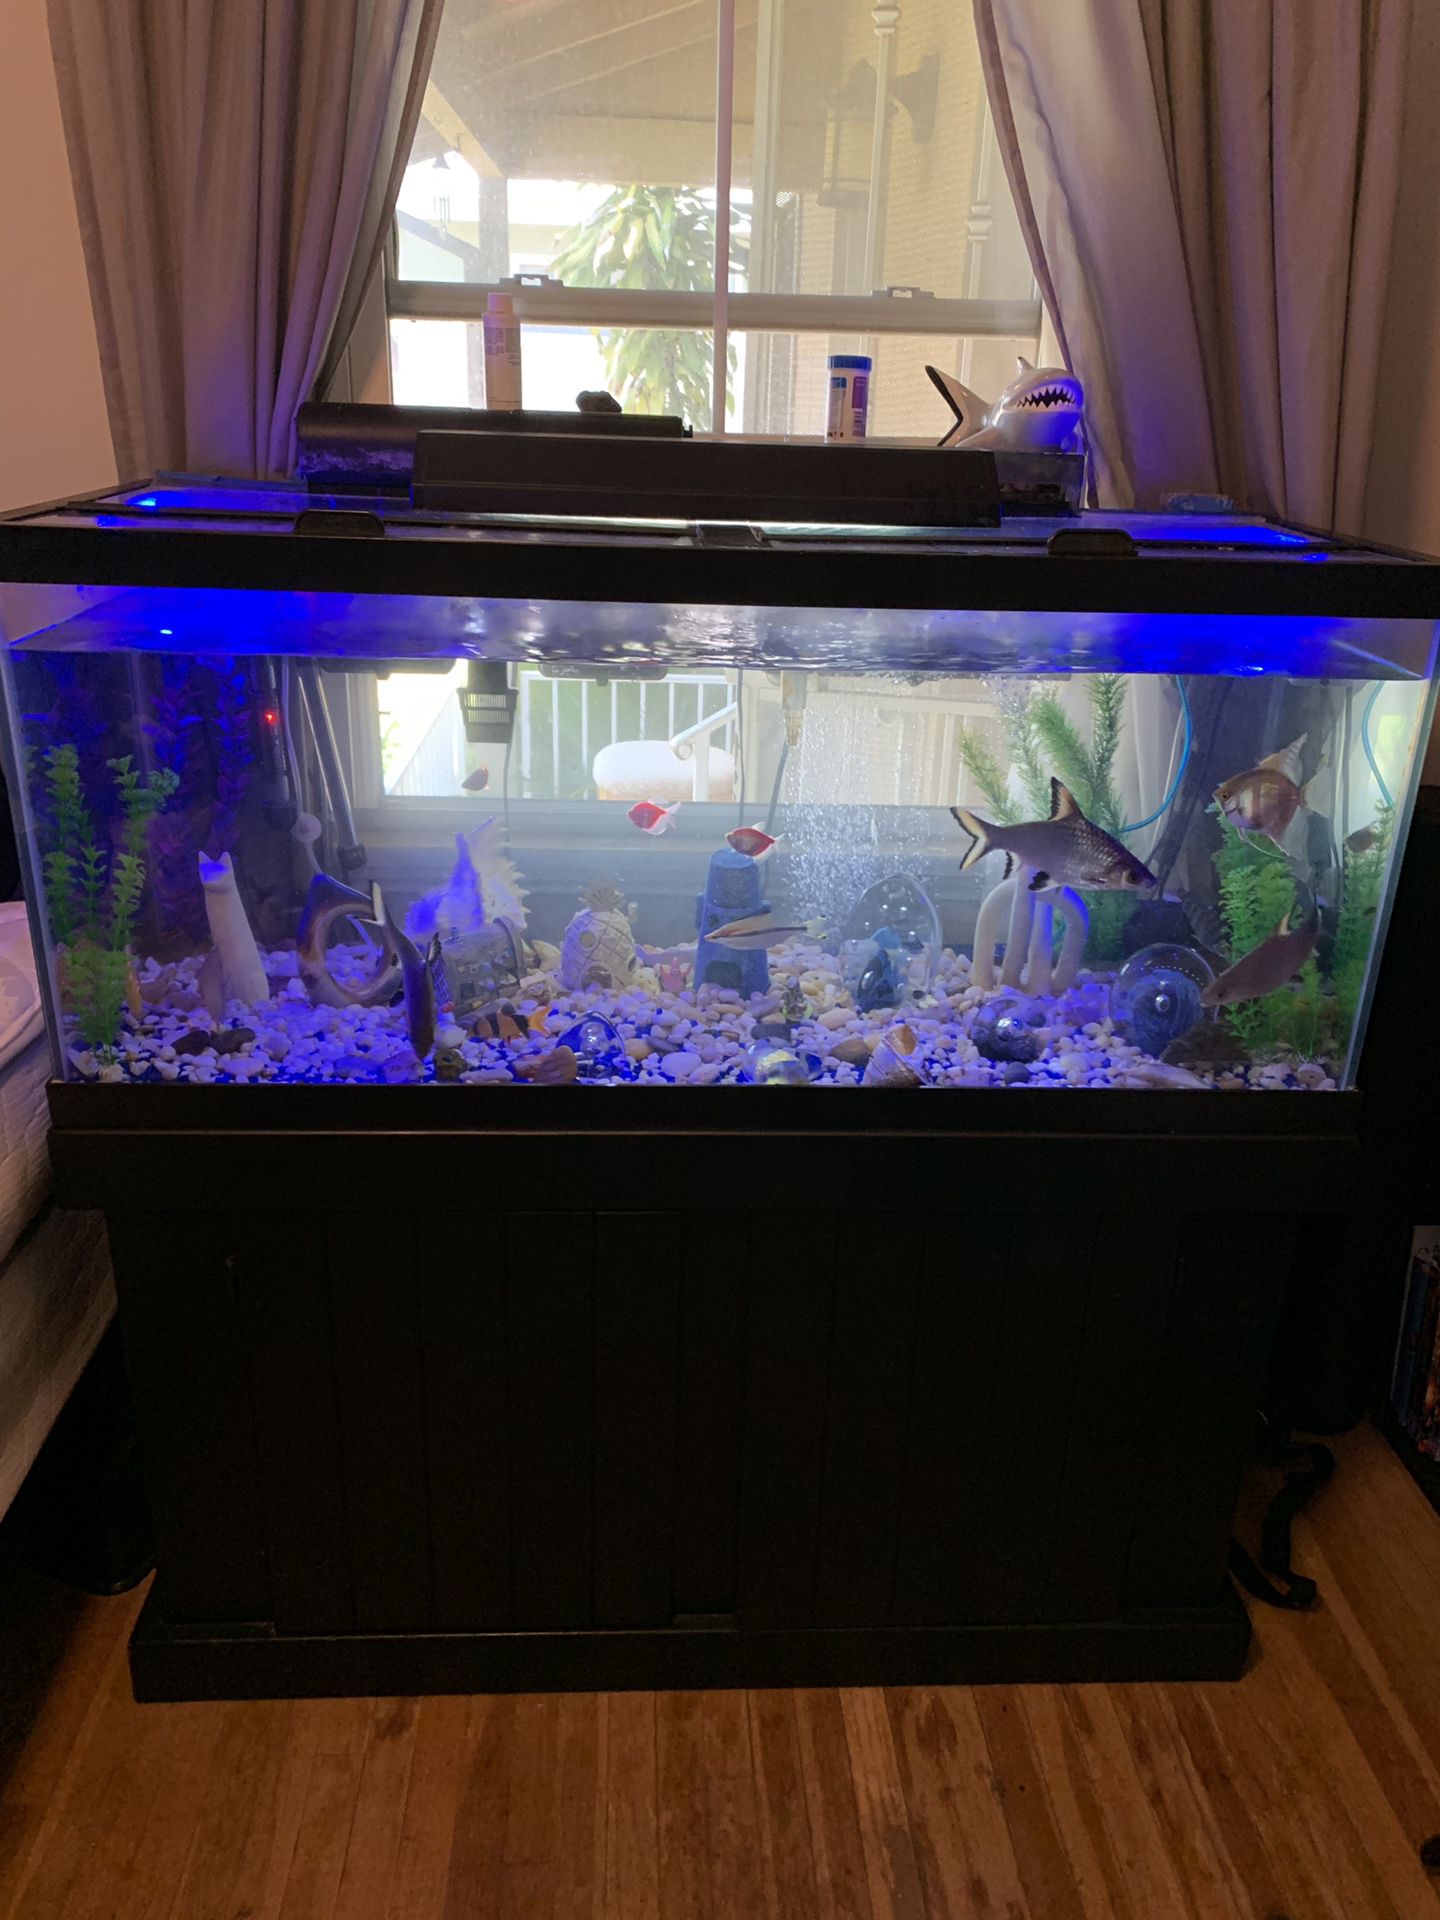 Gorgeous dream 80 gallon fish tank / aquarium. Fully loaded. Filters, heaters, fish, bubblers. EVERYTHING!!!